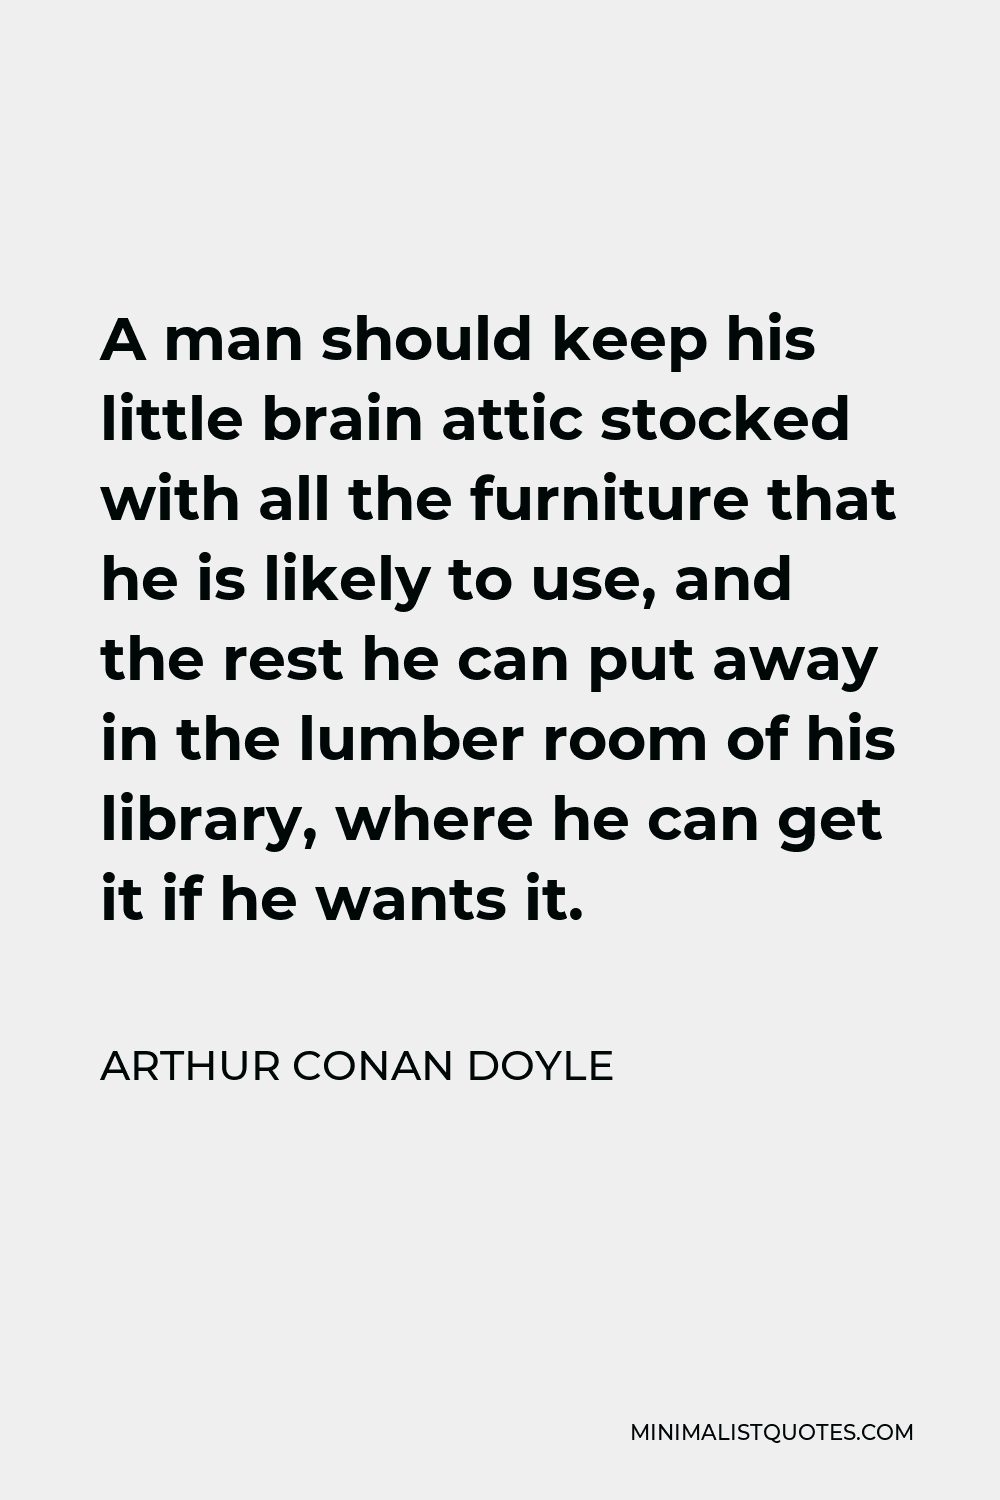 Arthur Conan Doyle Quote - A man should keep his little brain attic stocked with all the furniture that he is likely to use, and the rest he can put away in the lumber room of his library, where he can get it if he wants it.